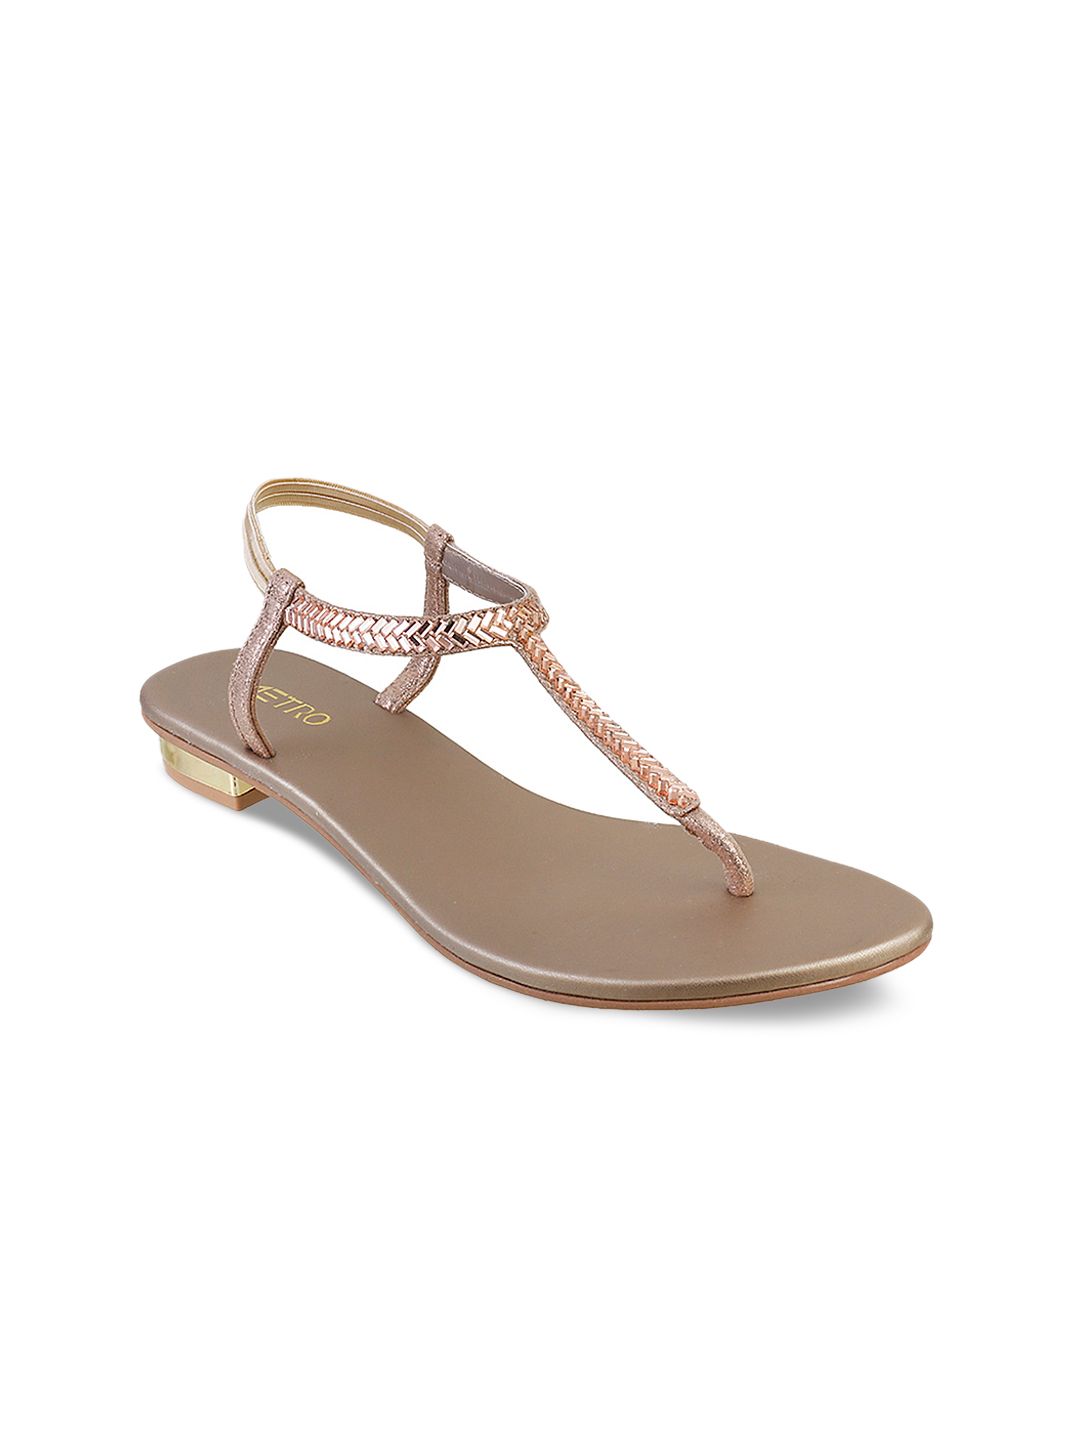 Metro Women Gold-Toned Solid Synthetic T-Strap Flats Price in India